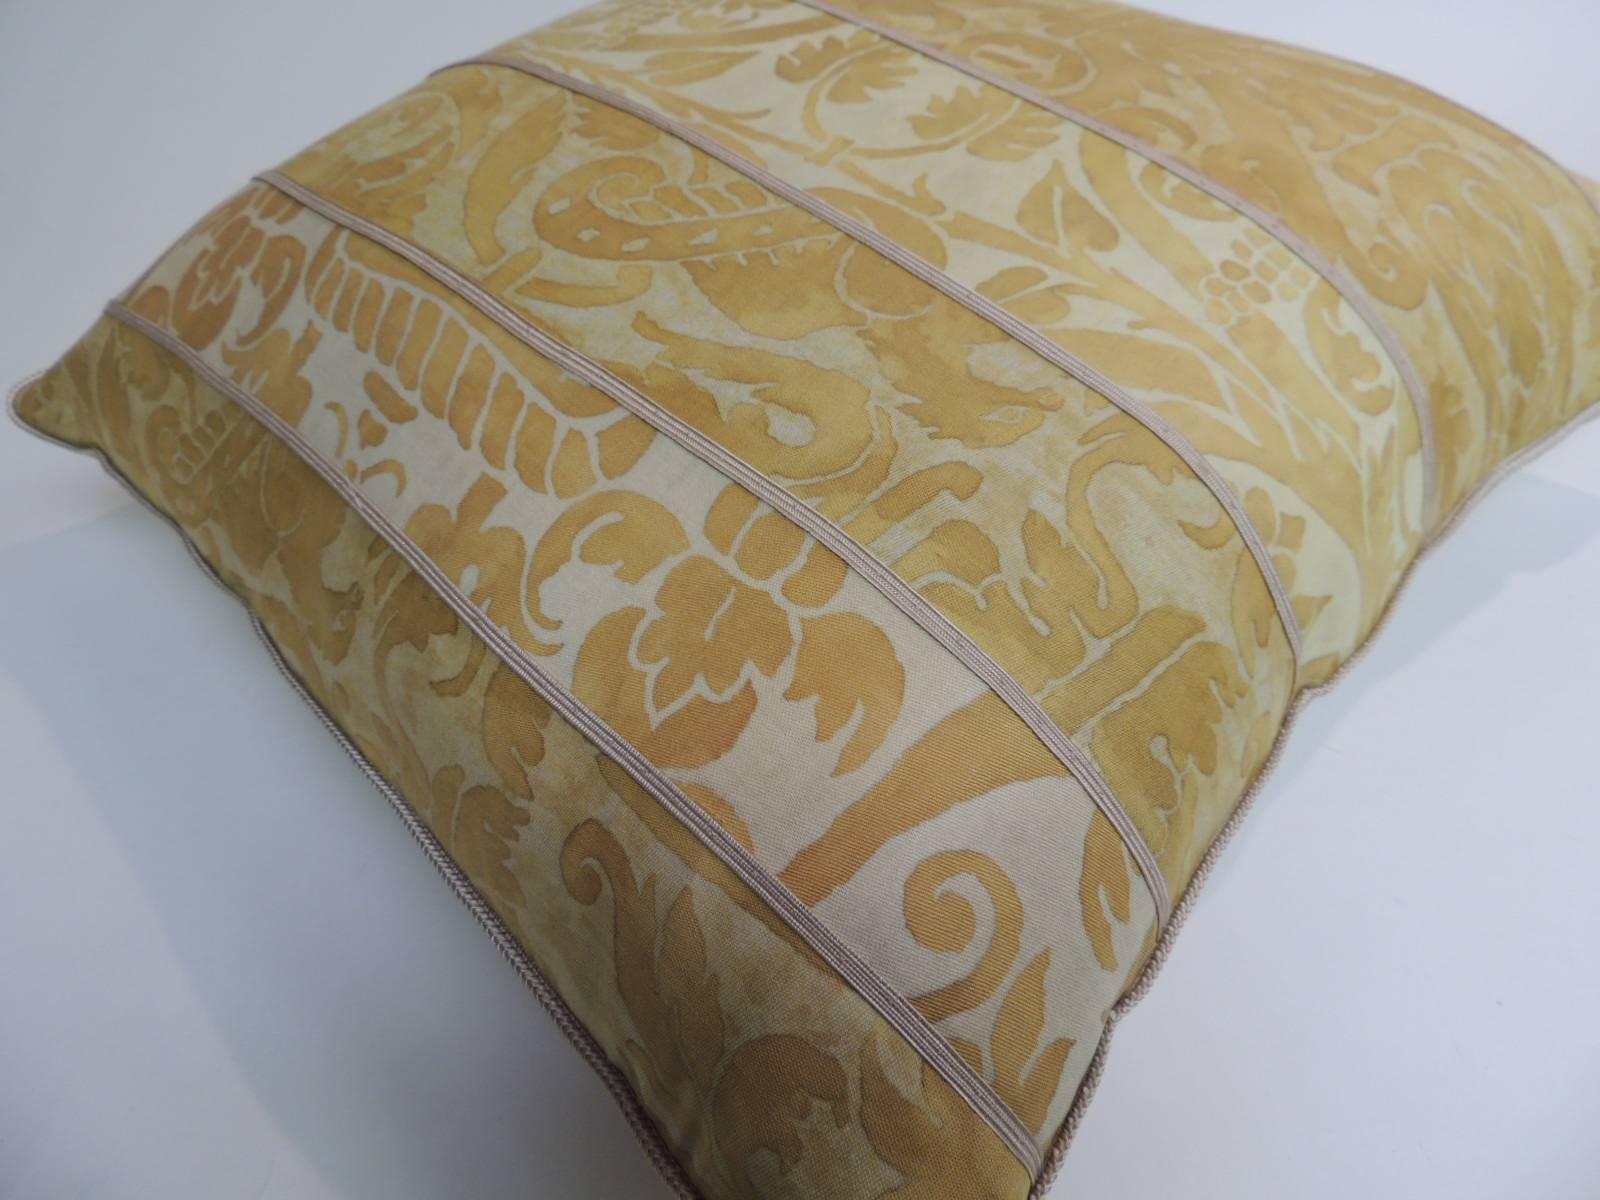 Regency Vintage Yellow Fortuny Uccelli Pattern Decorative Square Pillow